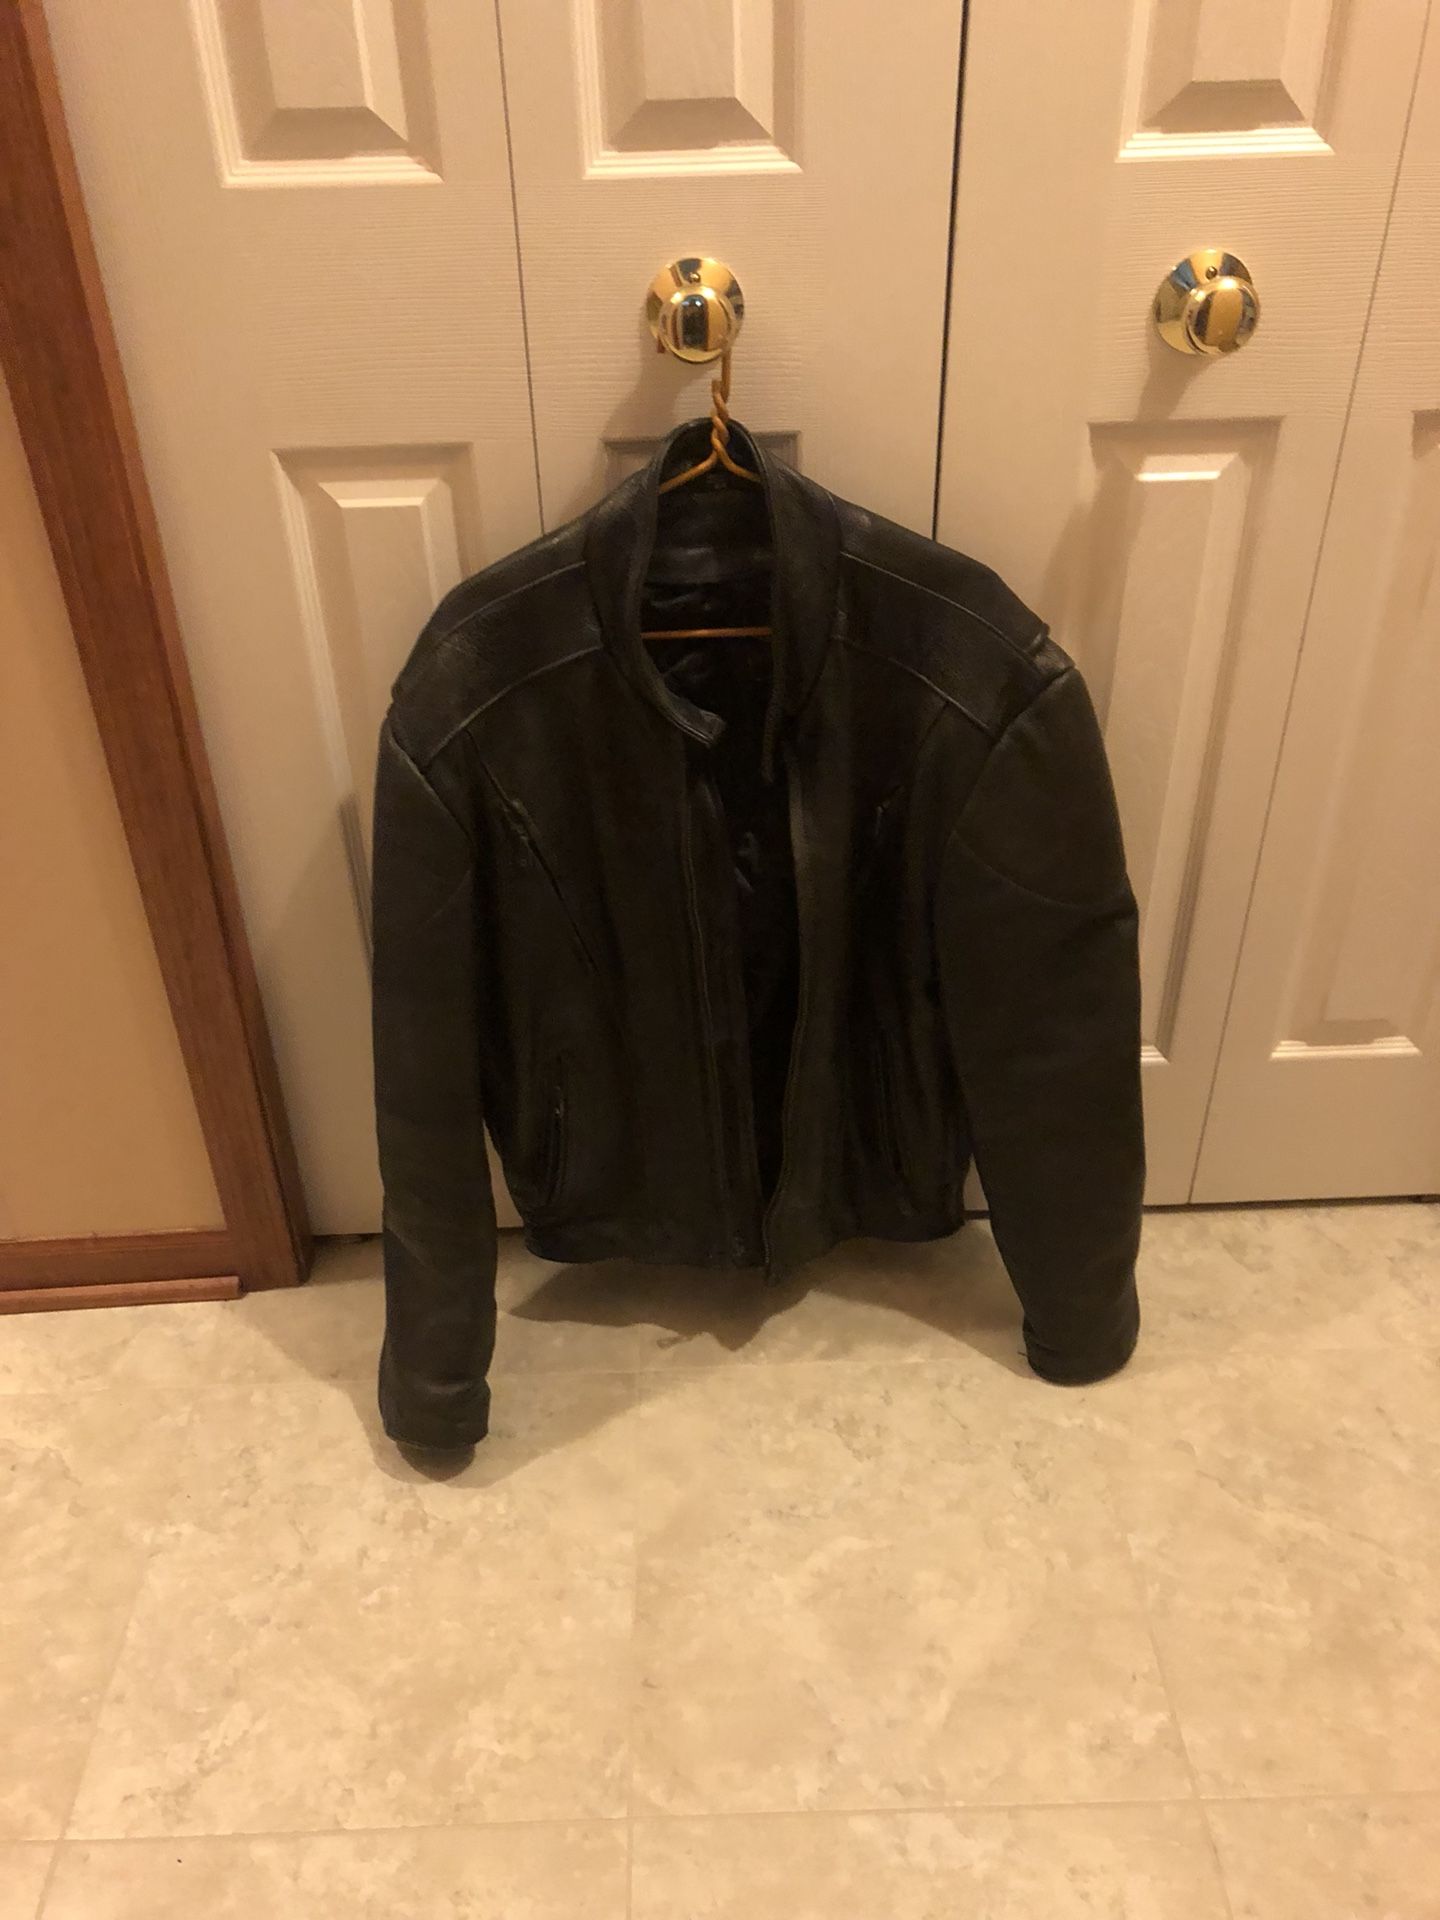 Motorcycle cycle jacket and vest